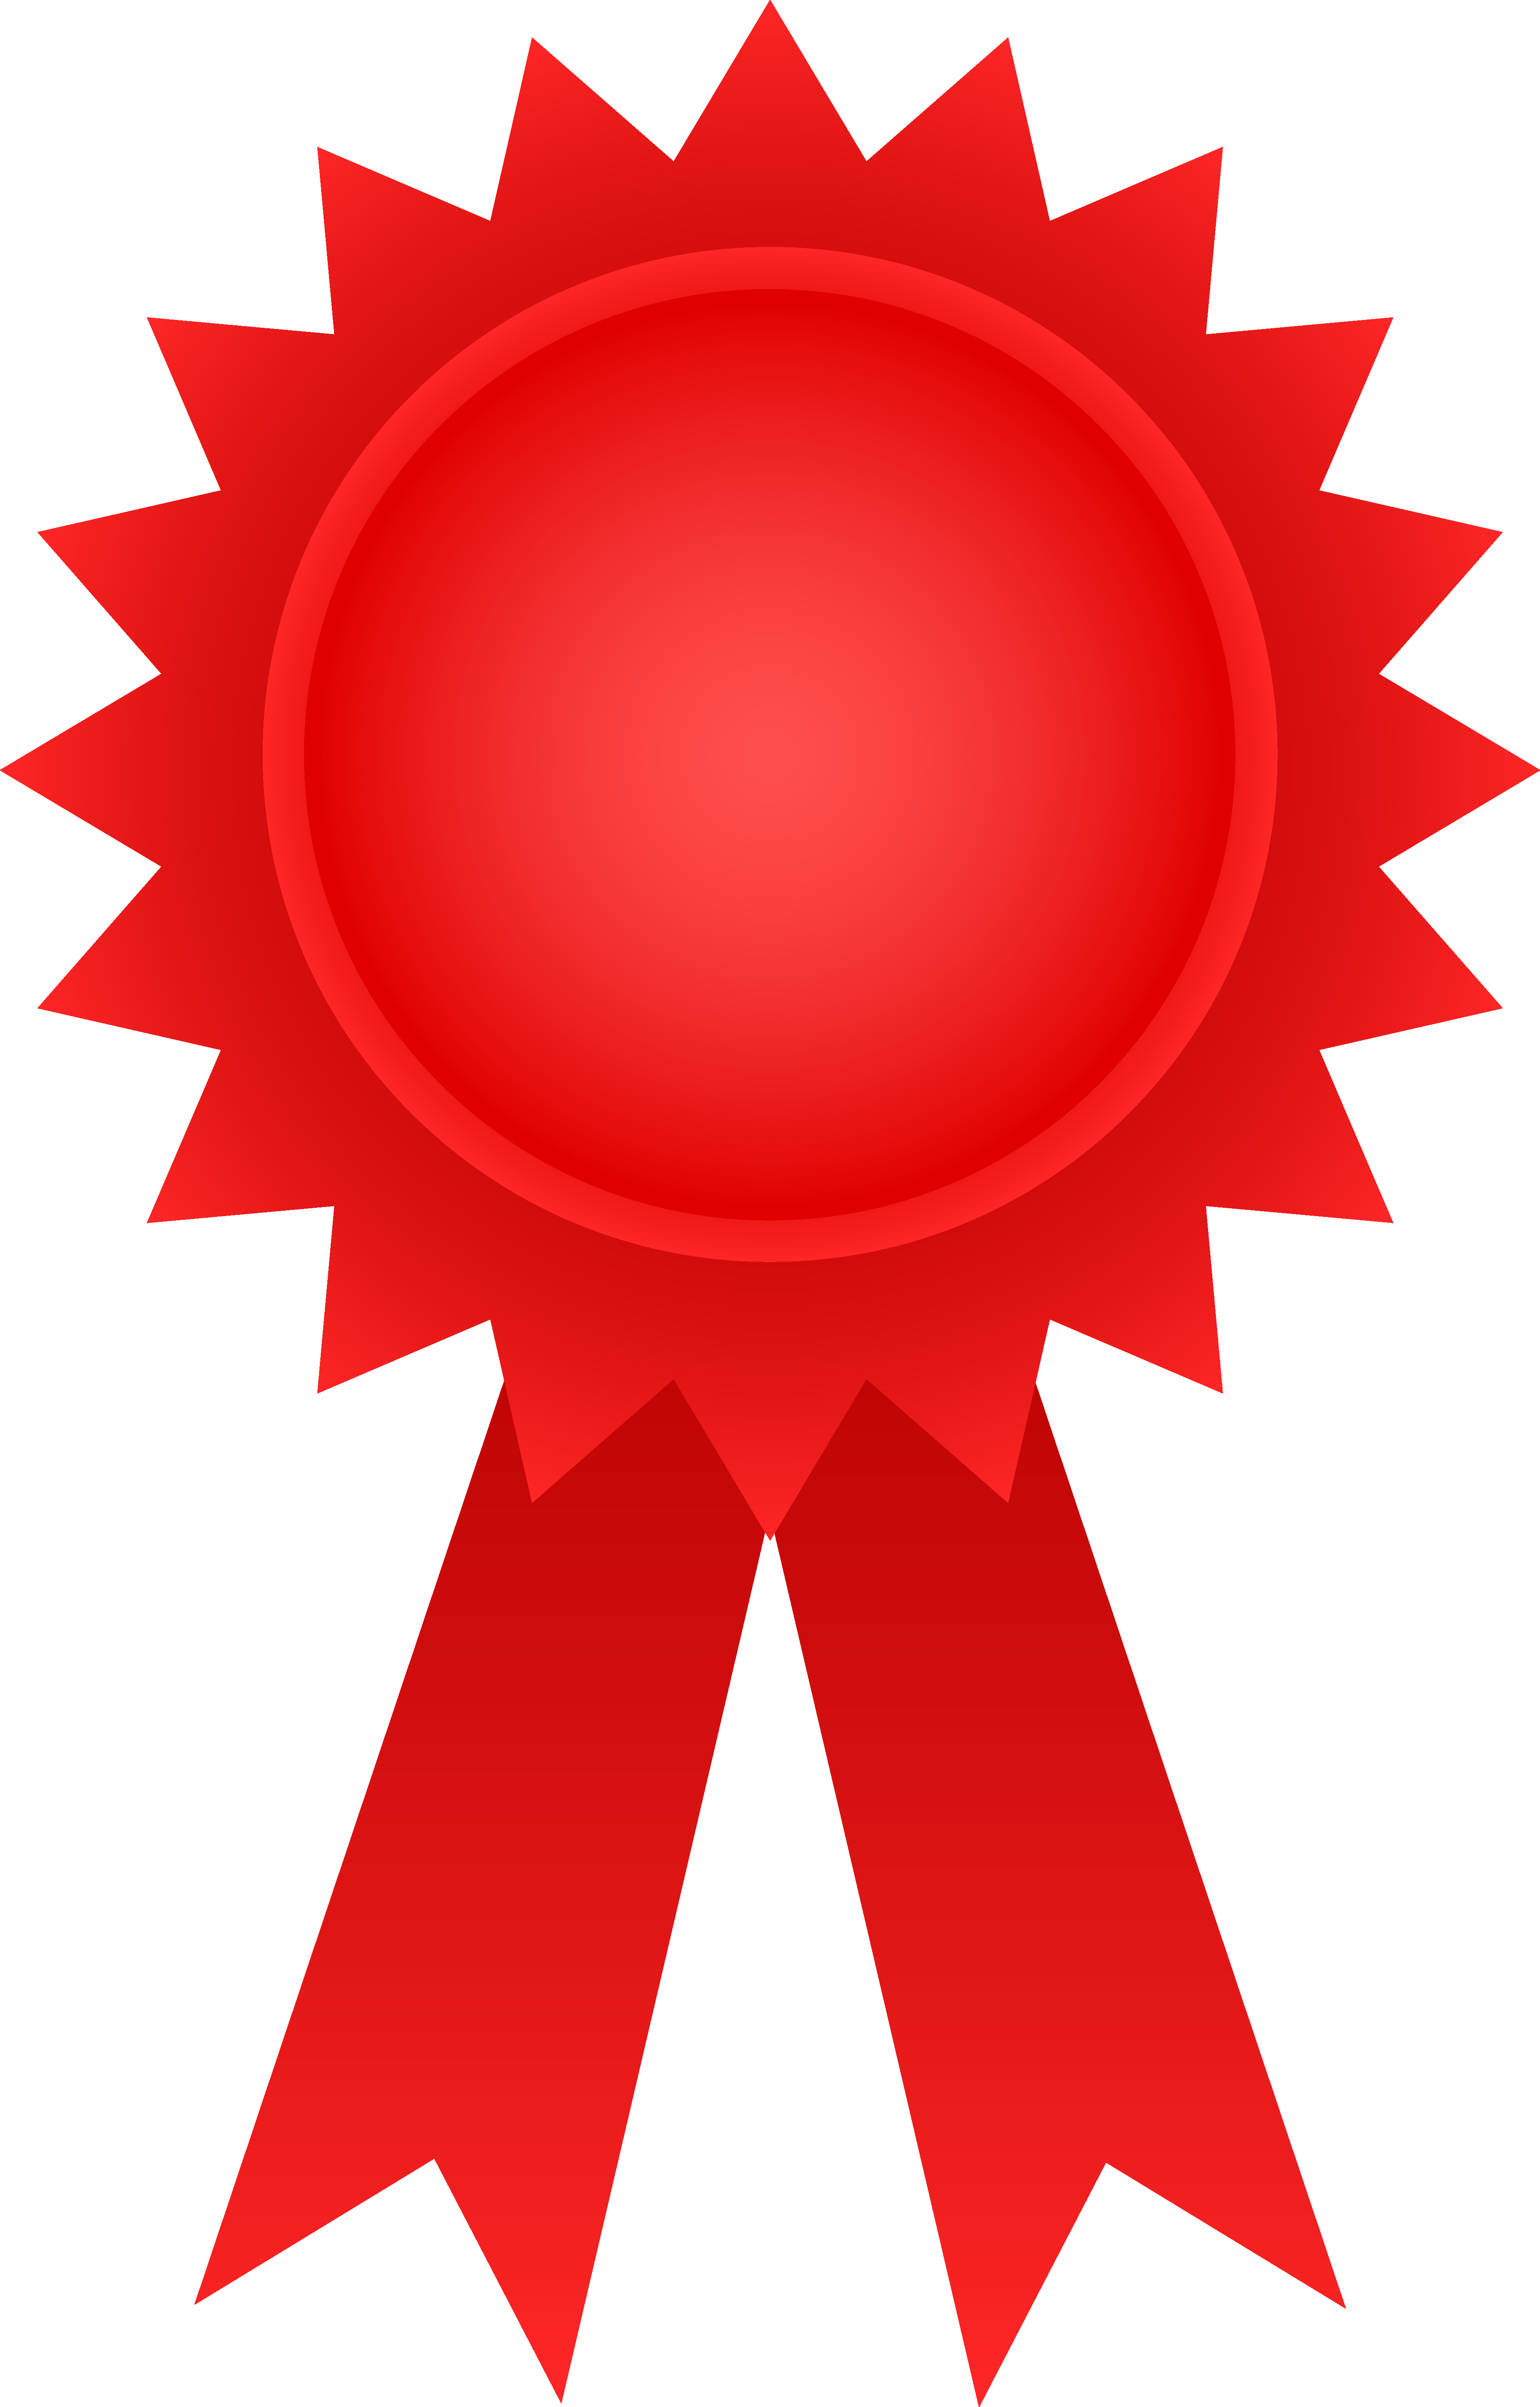 Ribbon Designs For Awards - ClipArt Best